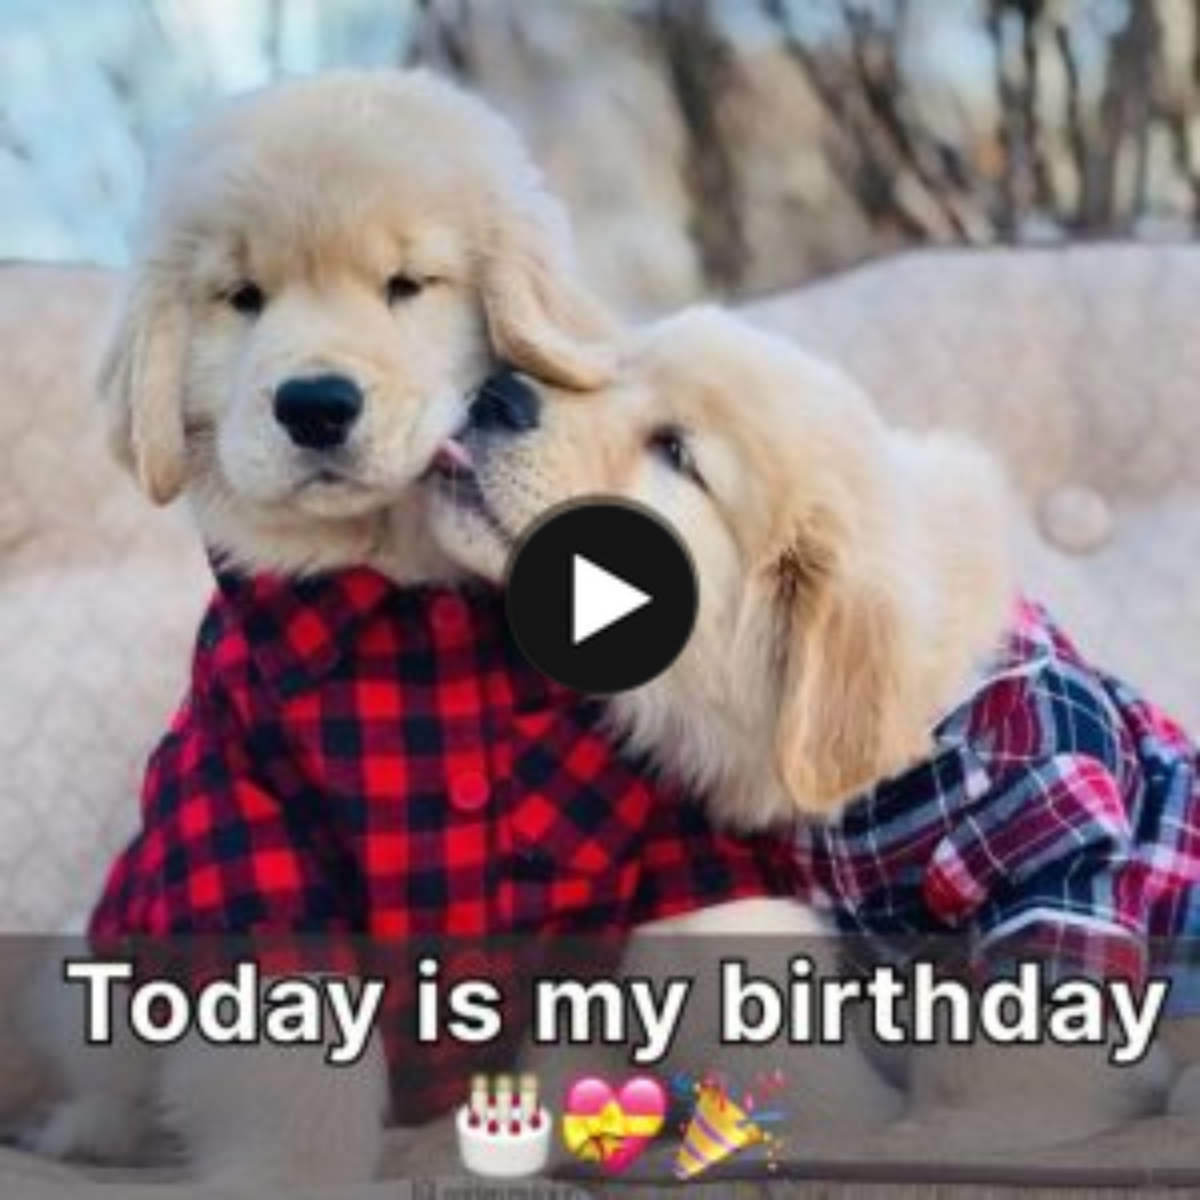 Today is my birthday, I have a companion with me, we are very happy and look forward to receiving loving wishes from everyone.